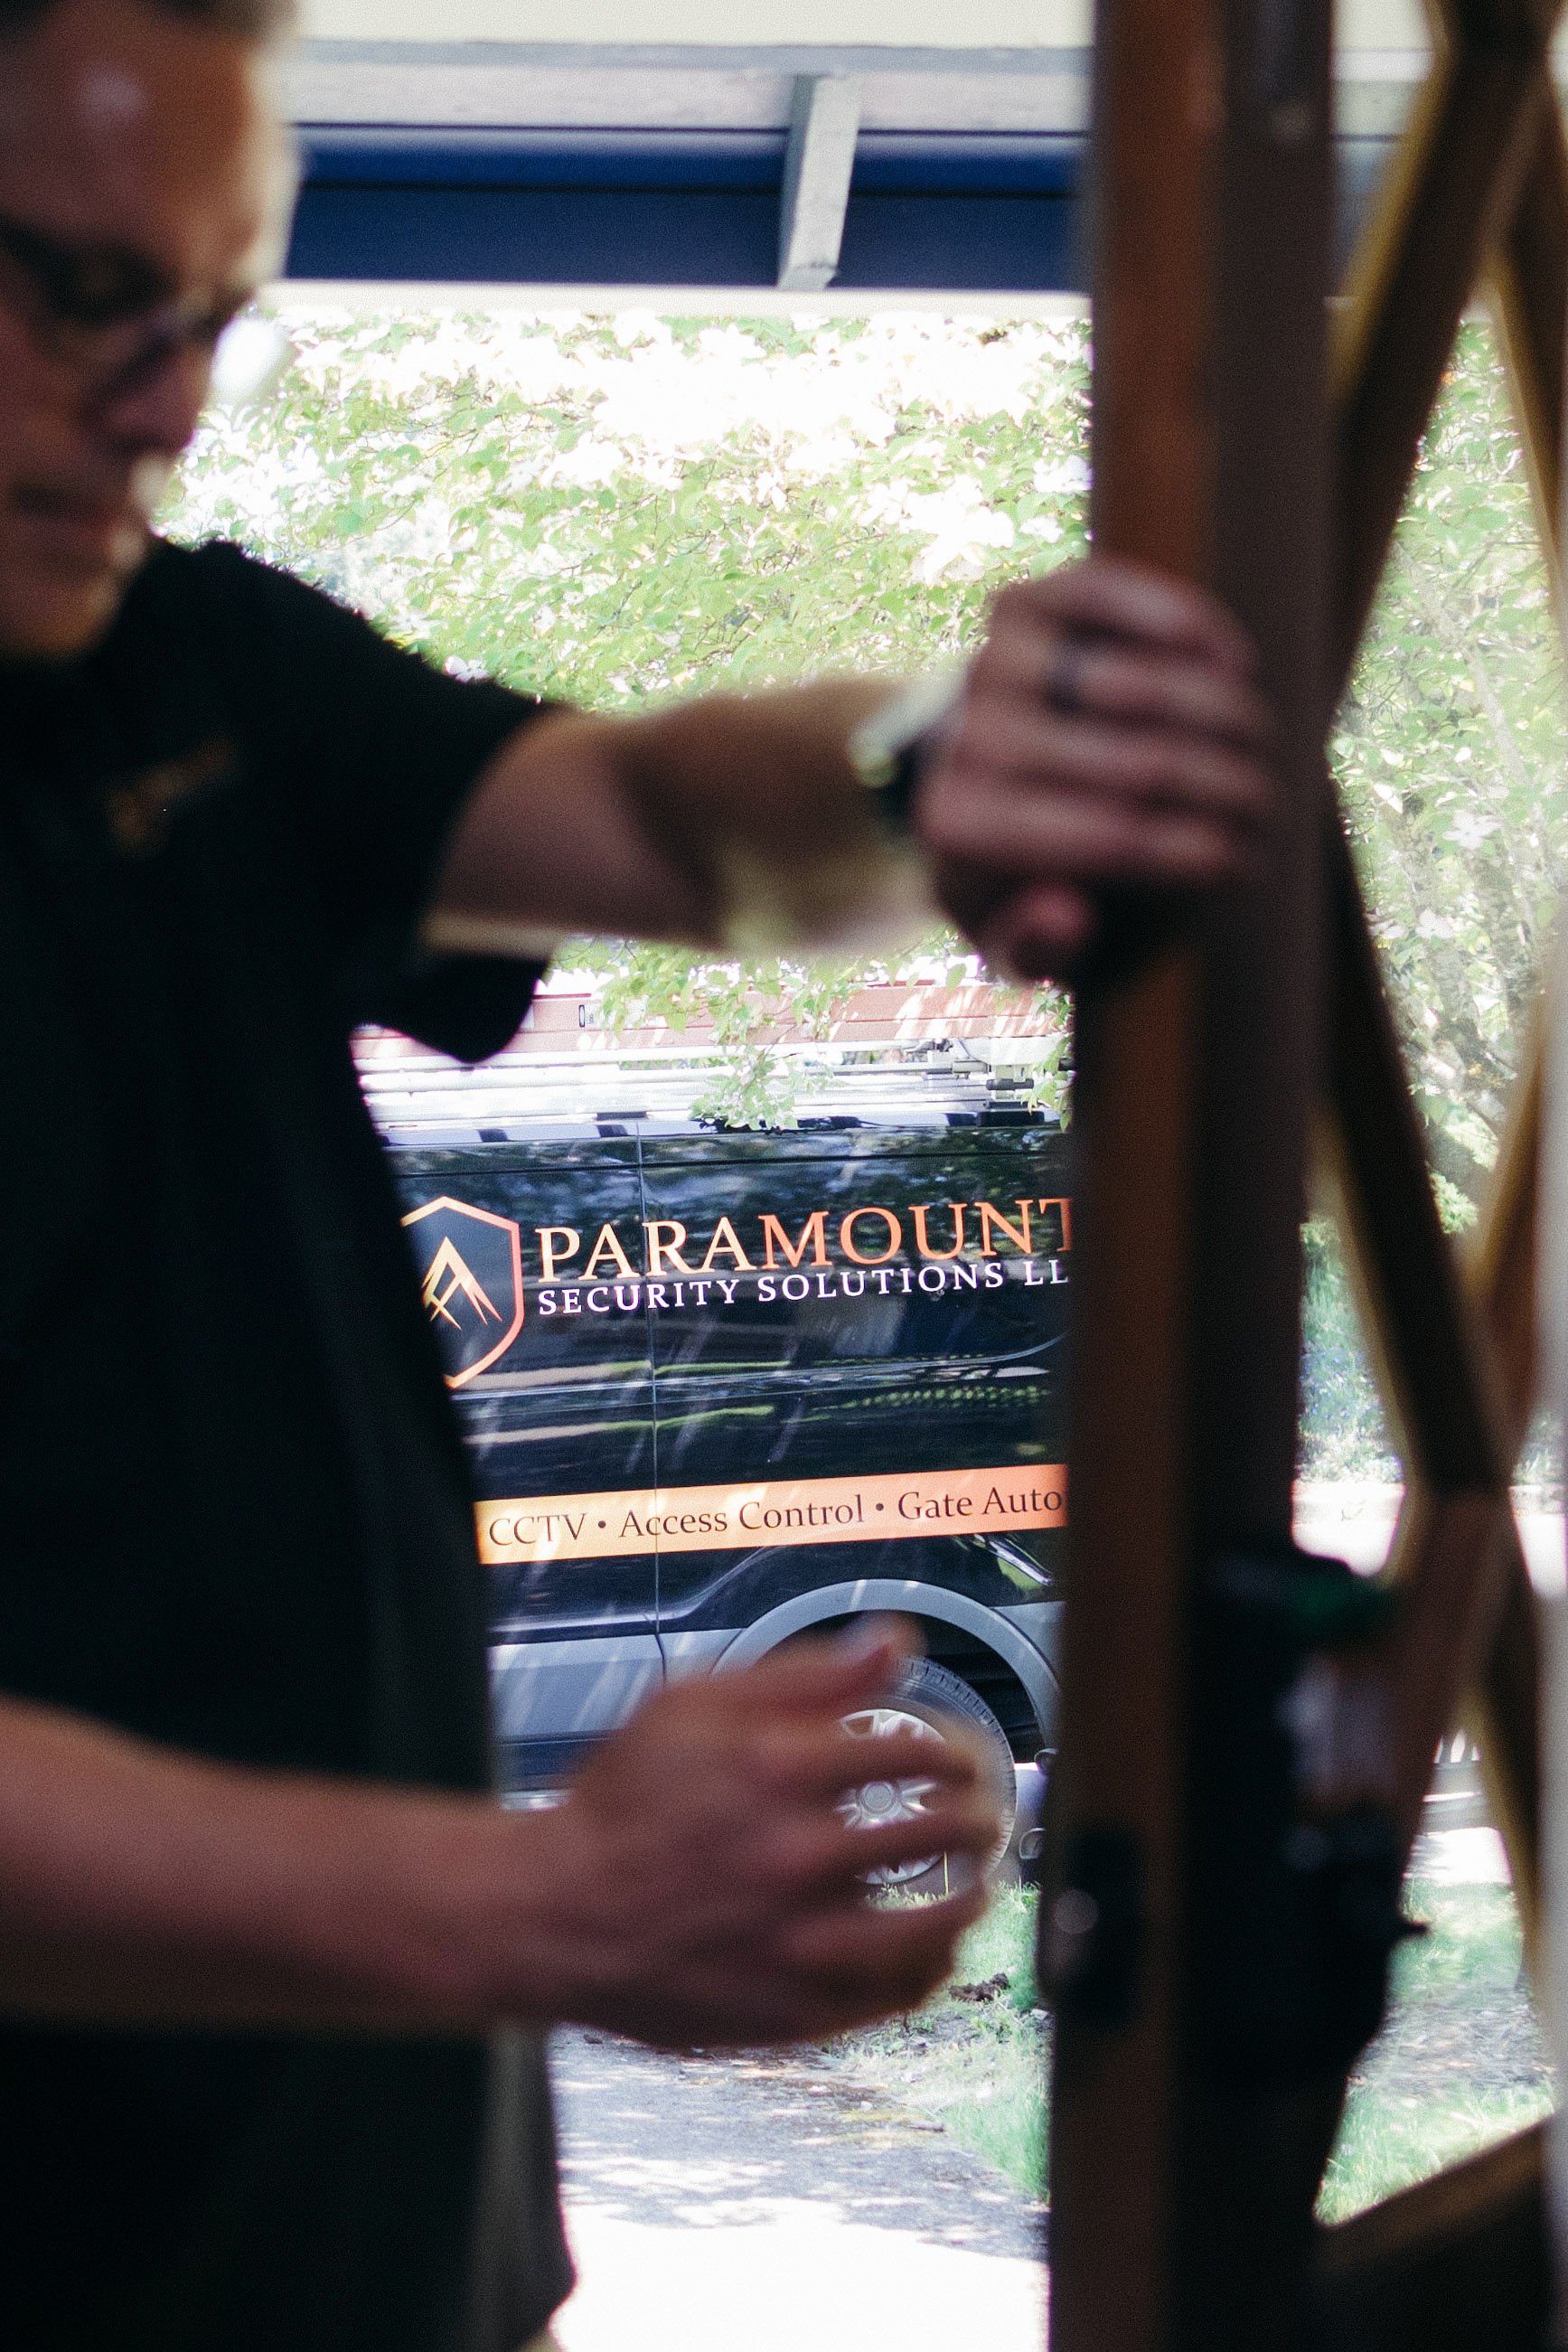 An image of a Paramount Solutions worker examining a door captured by the best brand photographer in Portland